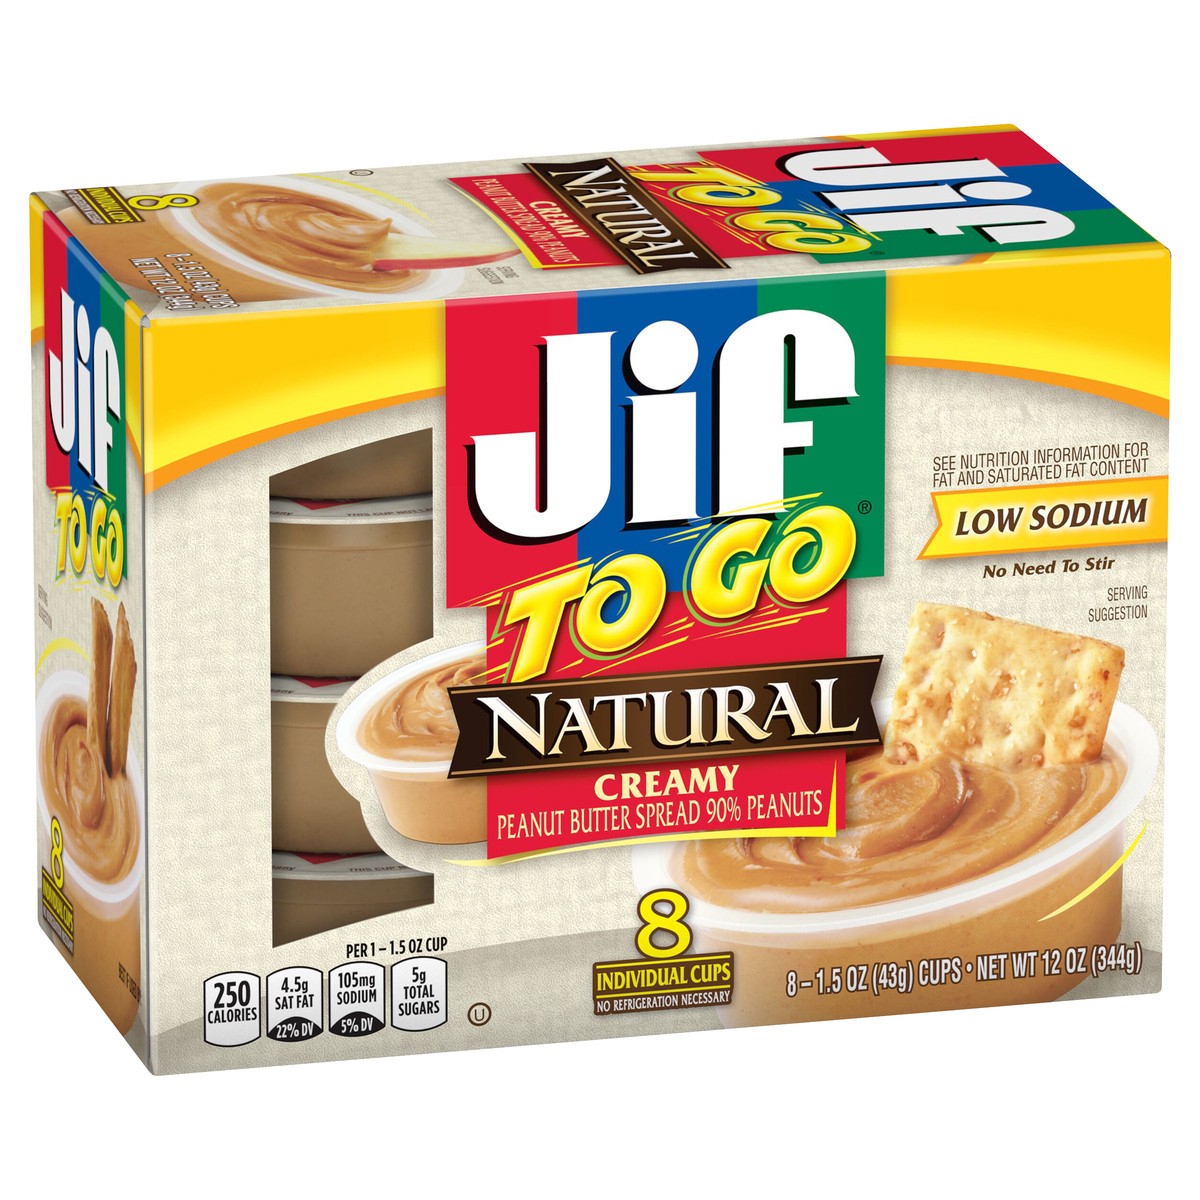 slide 2 of 8, Jif To Go Natural Creamy Peanut Butter Spread, 8- 1.5 Ounce Cups, Smooth and Creamy Texture, Snack Size Packs, 12 oz